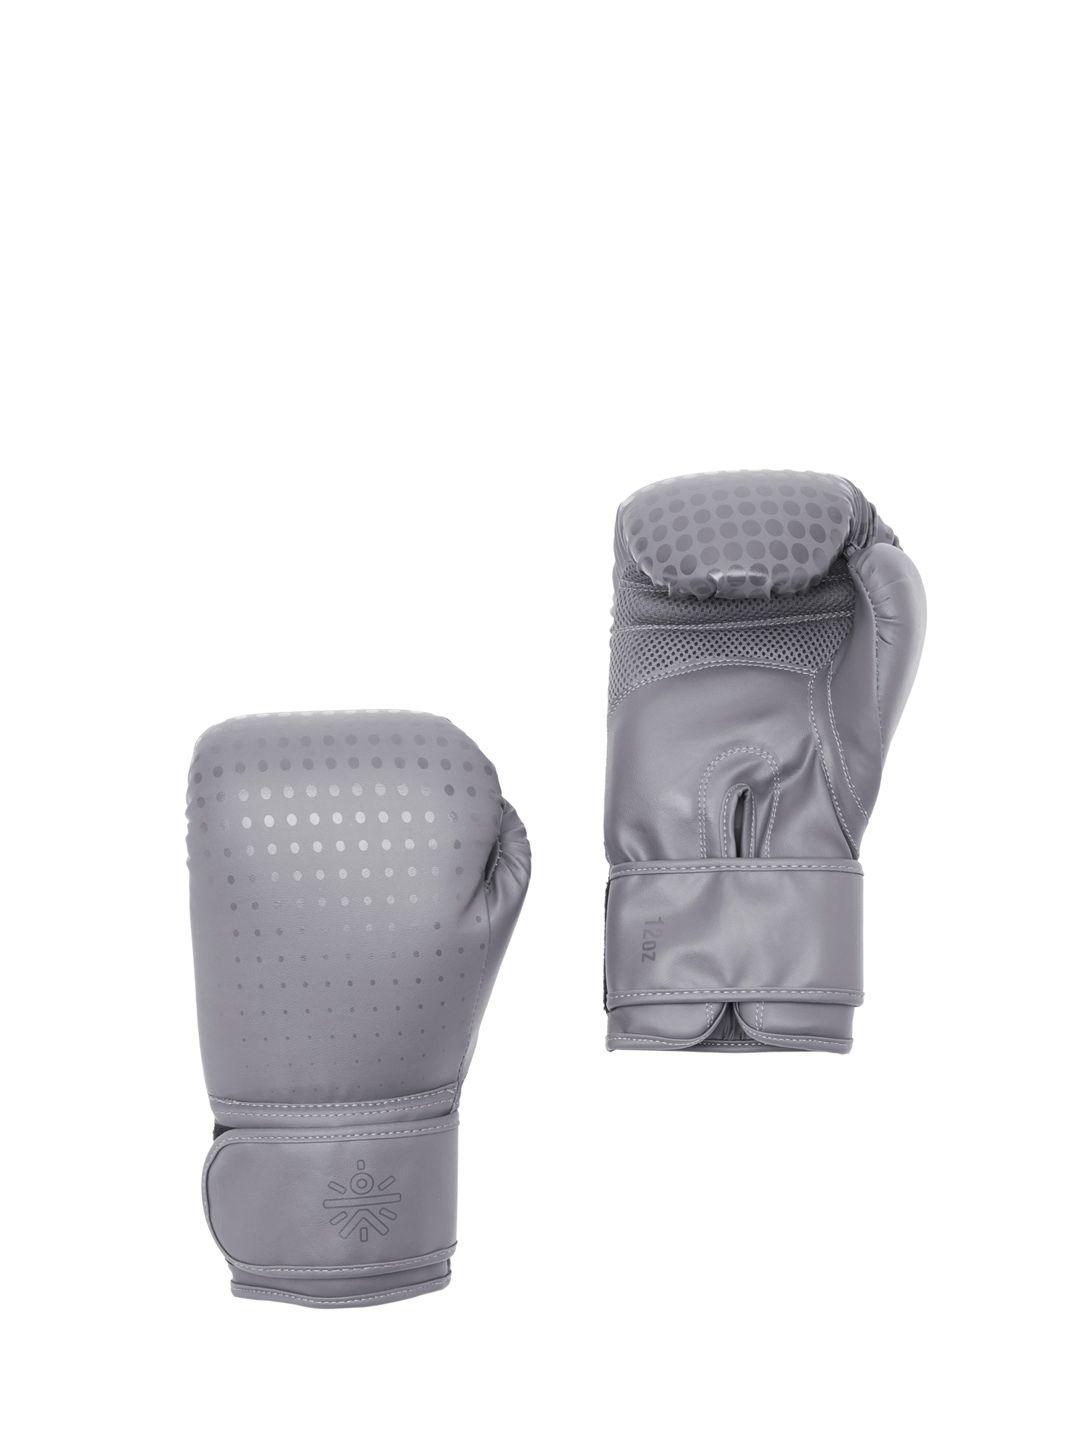 cultsportone printed pro boxing gloves with antimicrobial lining